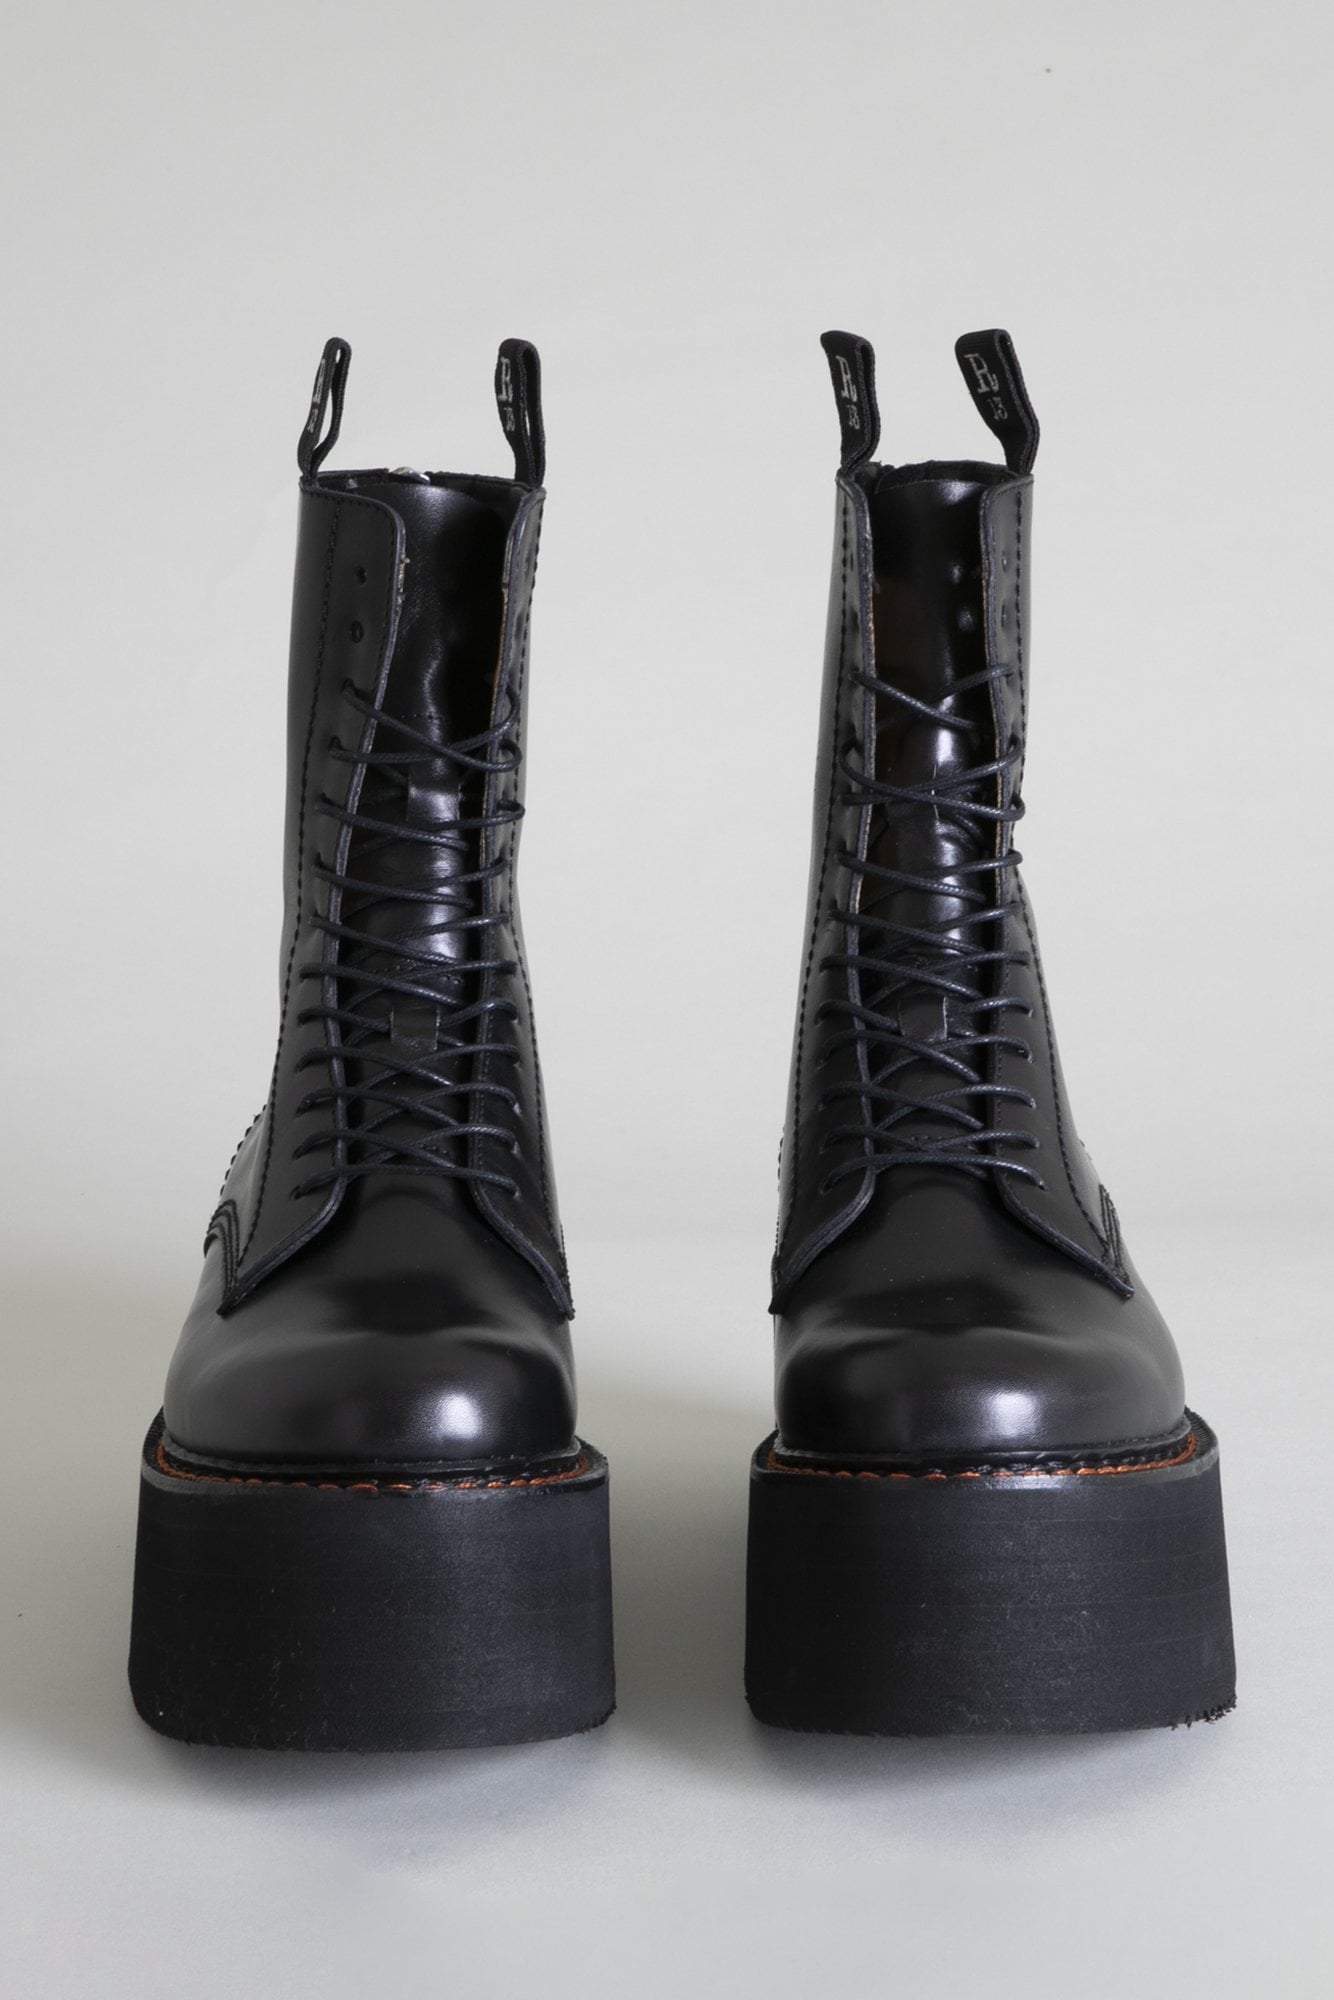 R13 Double Stack Boots